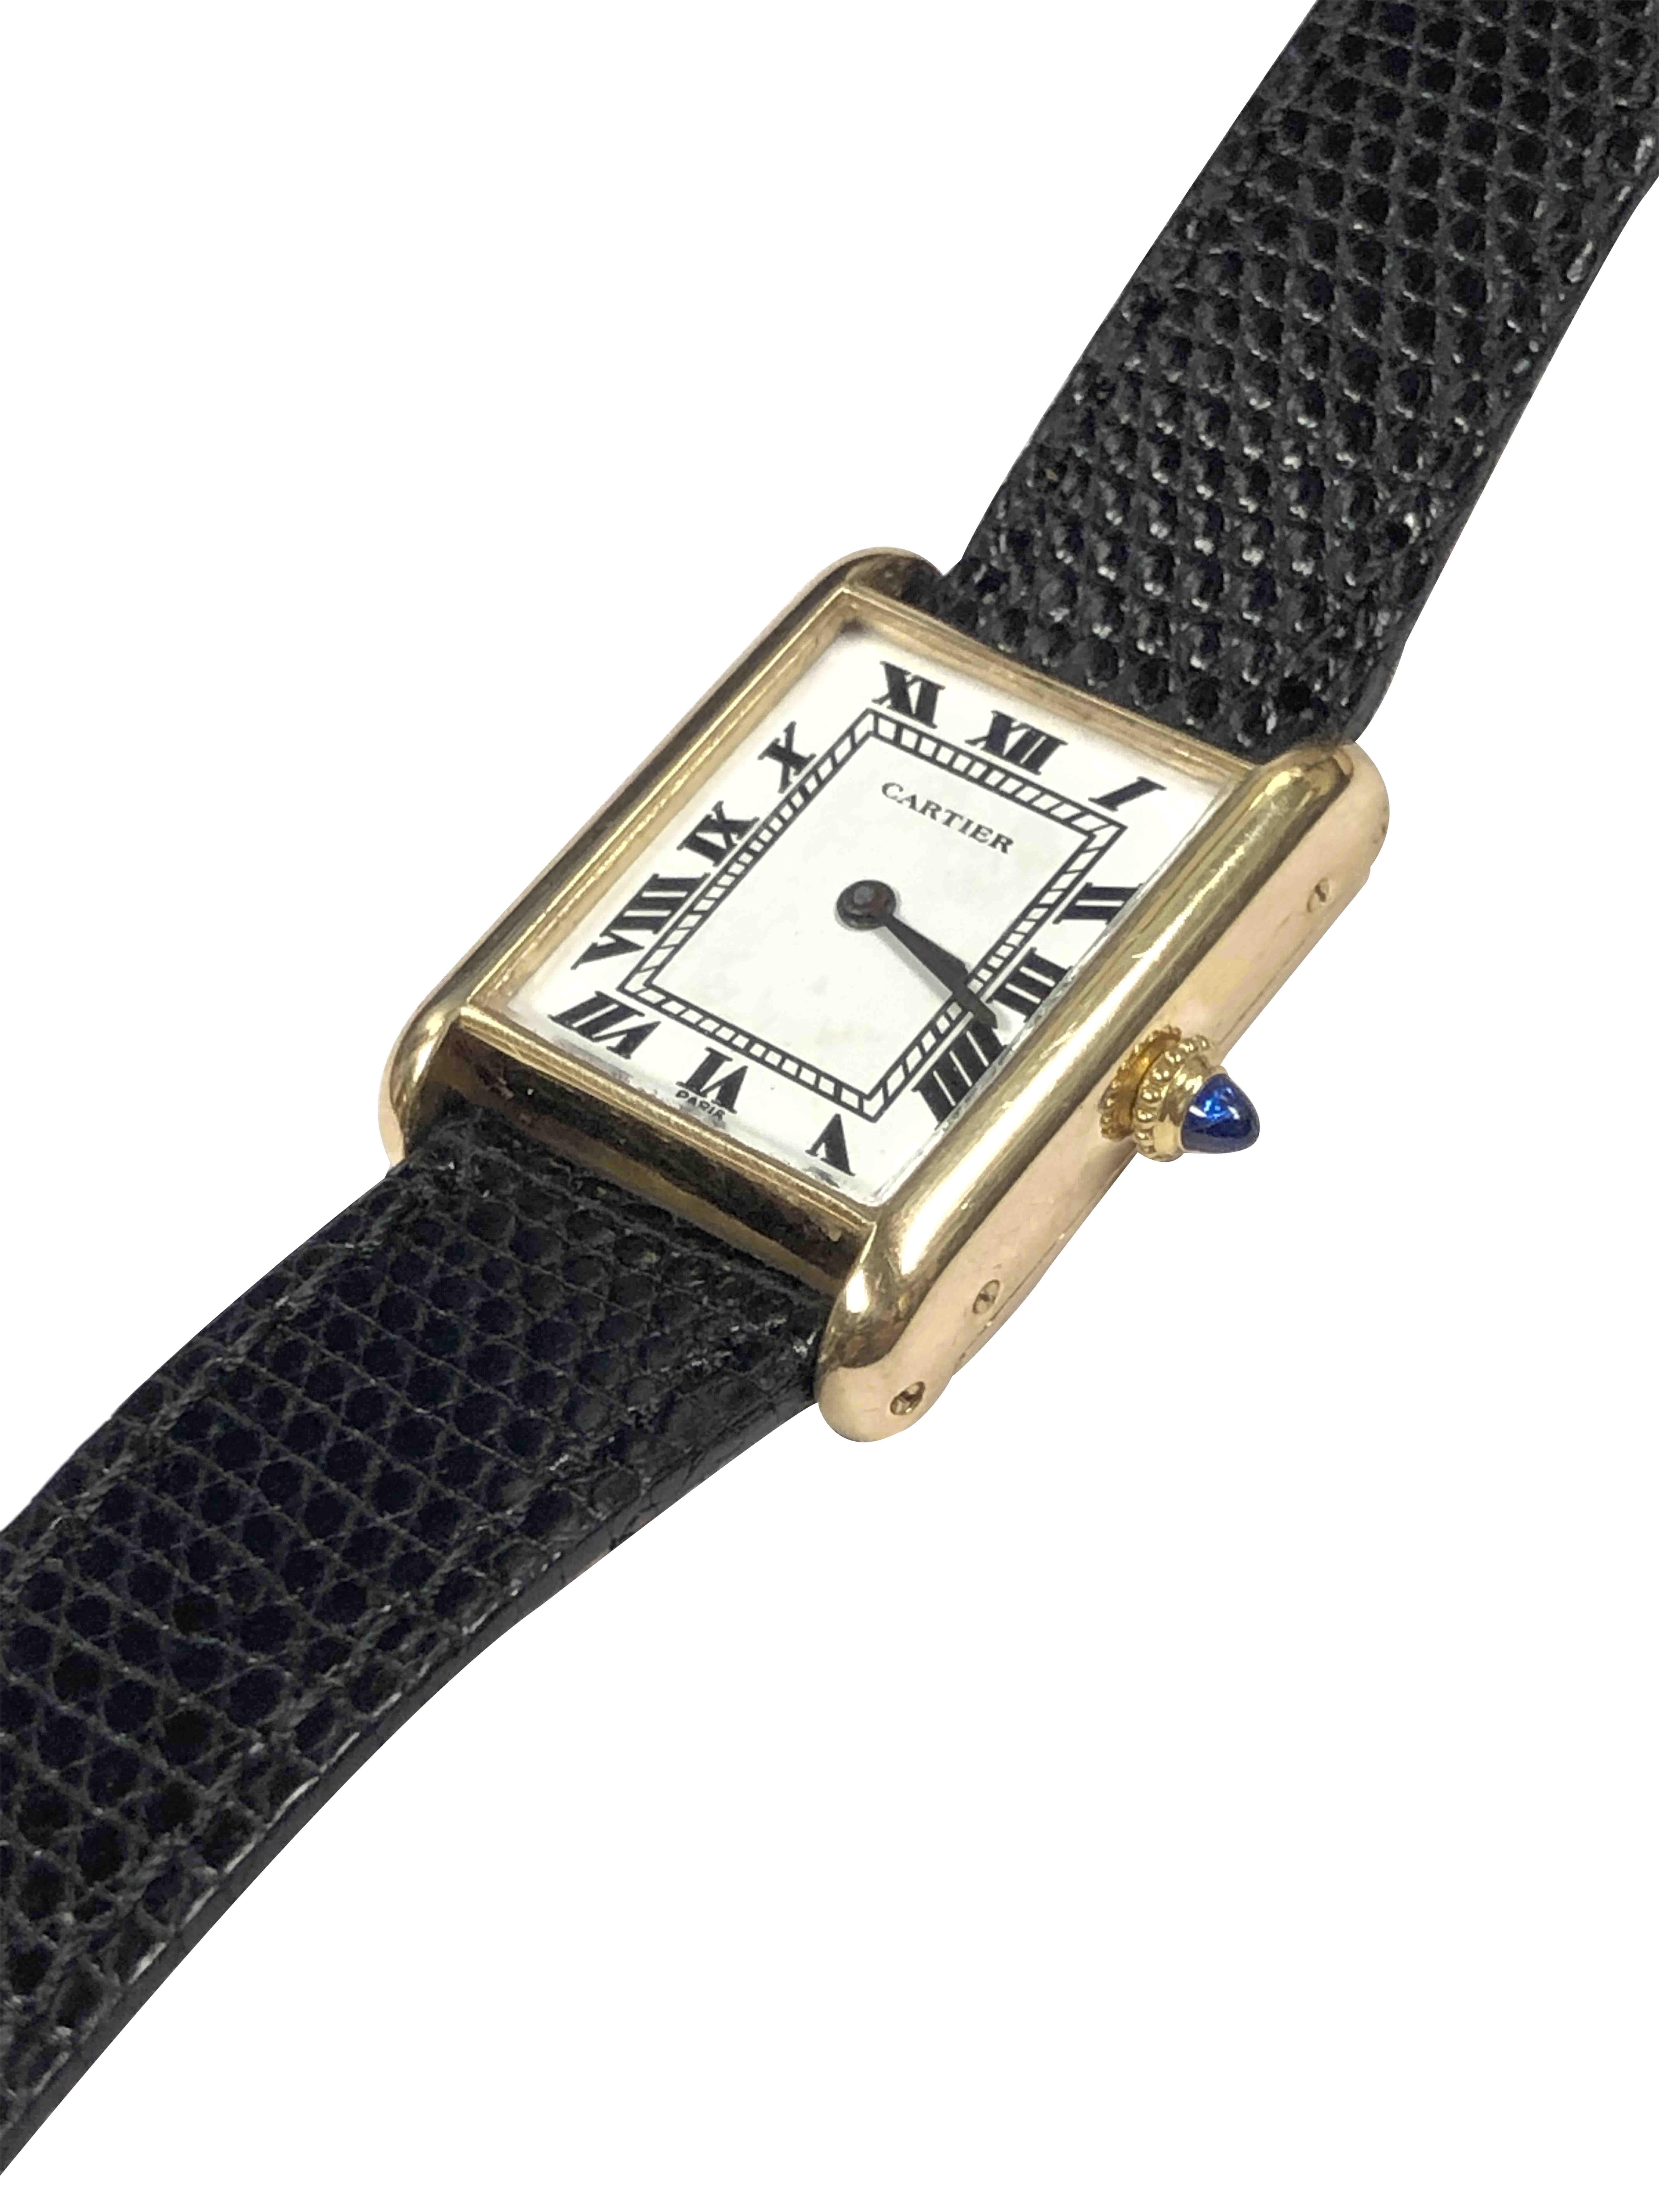 Circa 1980 Cartier Paris Classic Tank Wrist Watch, 30 X 23 M.M. 18K Yellow Gold 2 Piece case, Automatic, self winding movement, White dial with Black Roman Numerals, Sapphire crown. New Black Lizard strap with Cartier Gold Plate Tang Buckle.  Comes